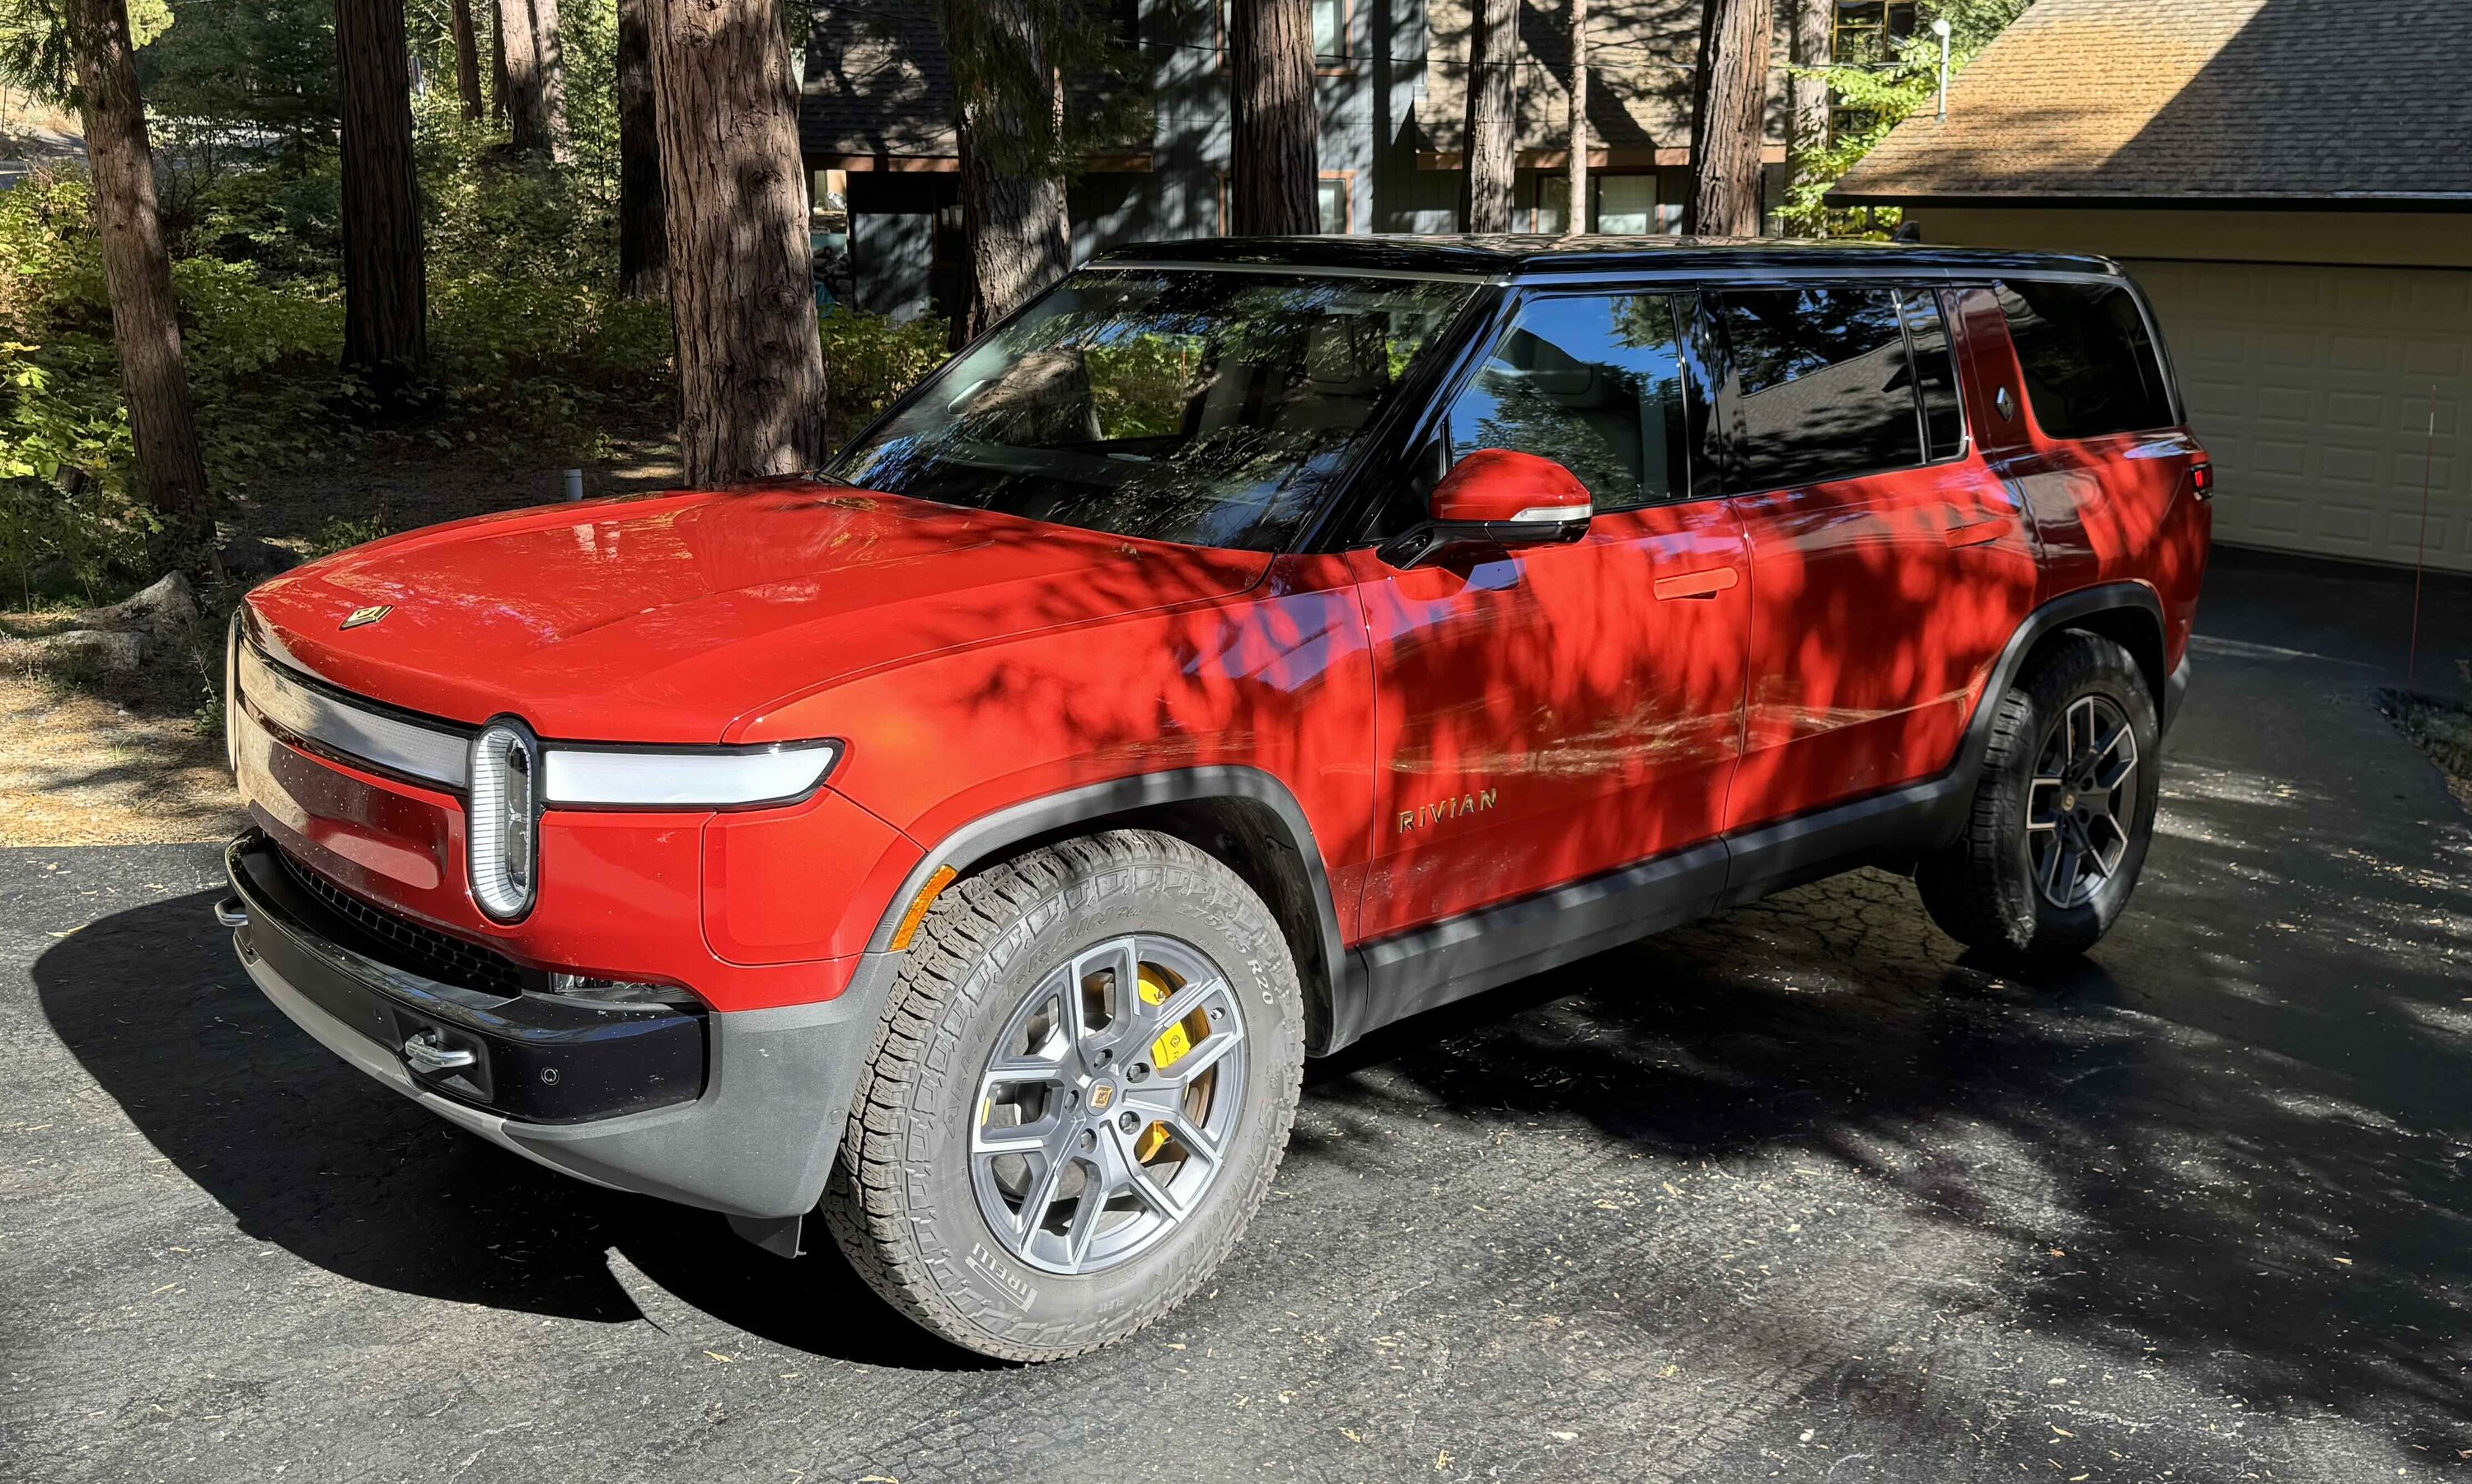 Rivian R1T R1S No longer for sale - 2023 Rivian R1S Canyon Red $84.5k for sale IMG_0359